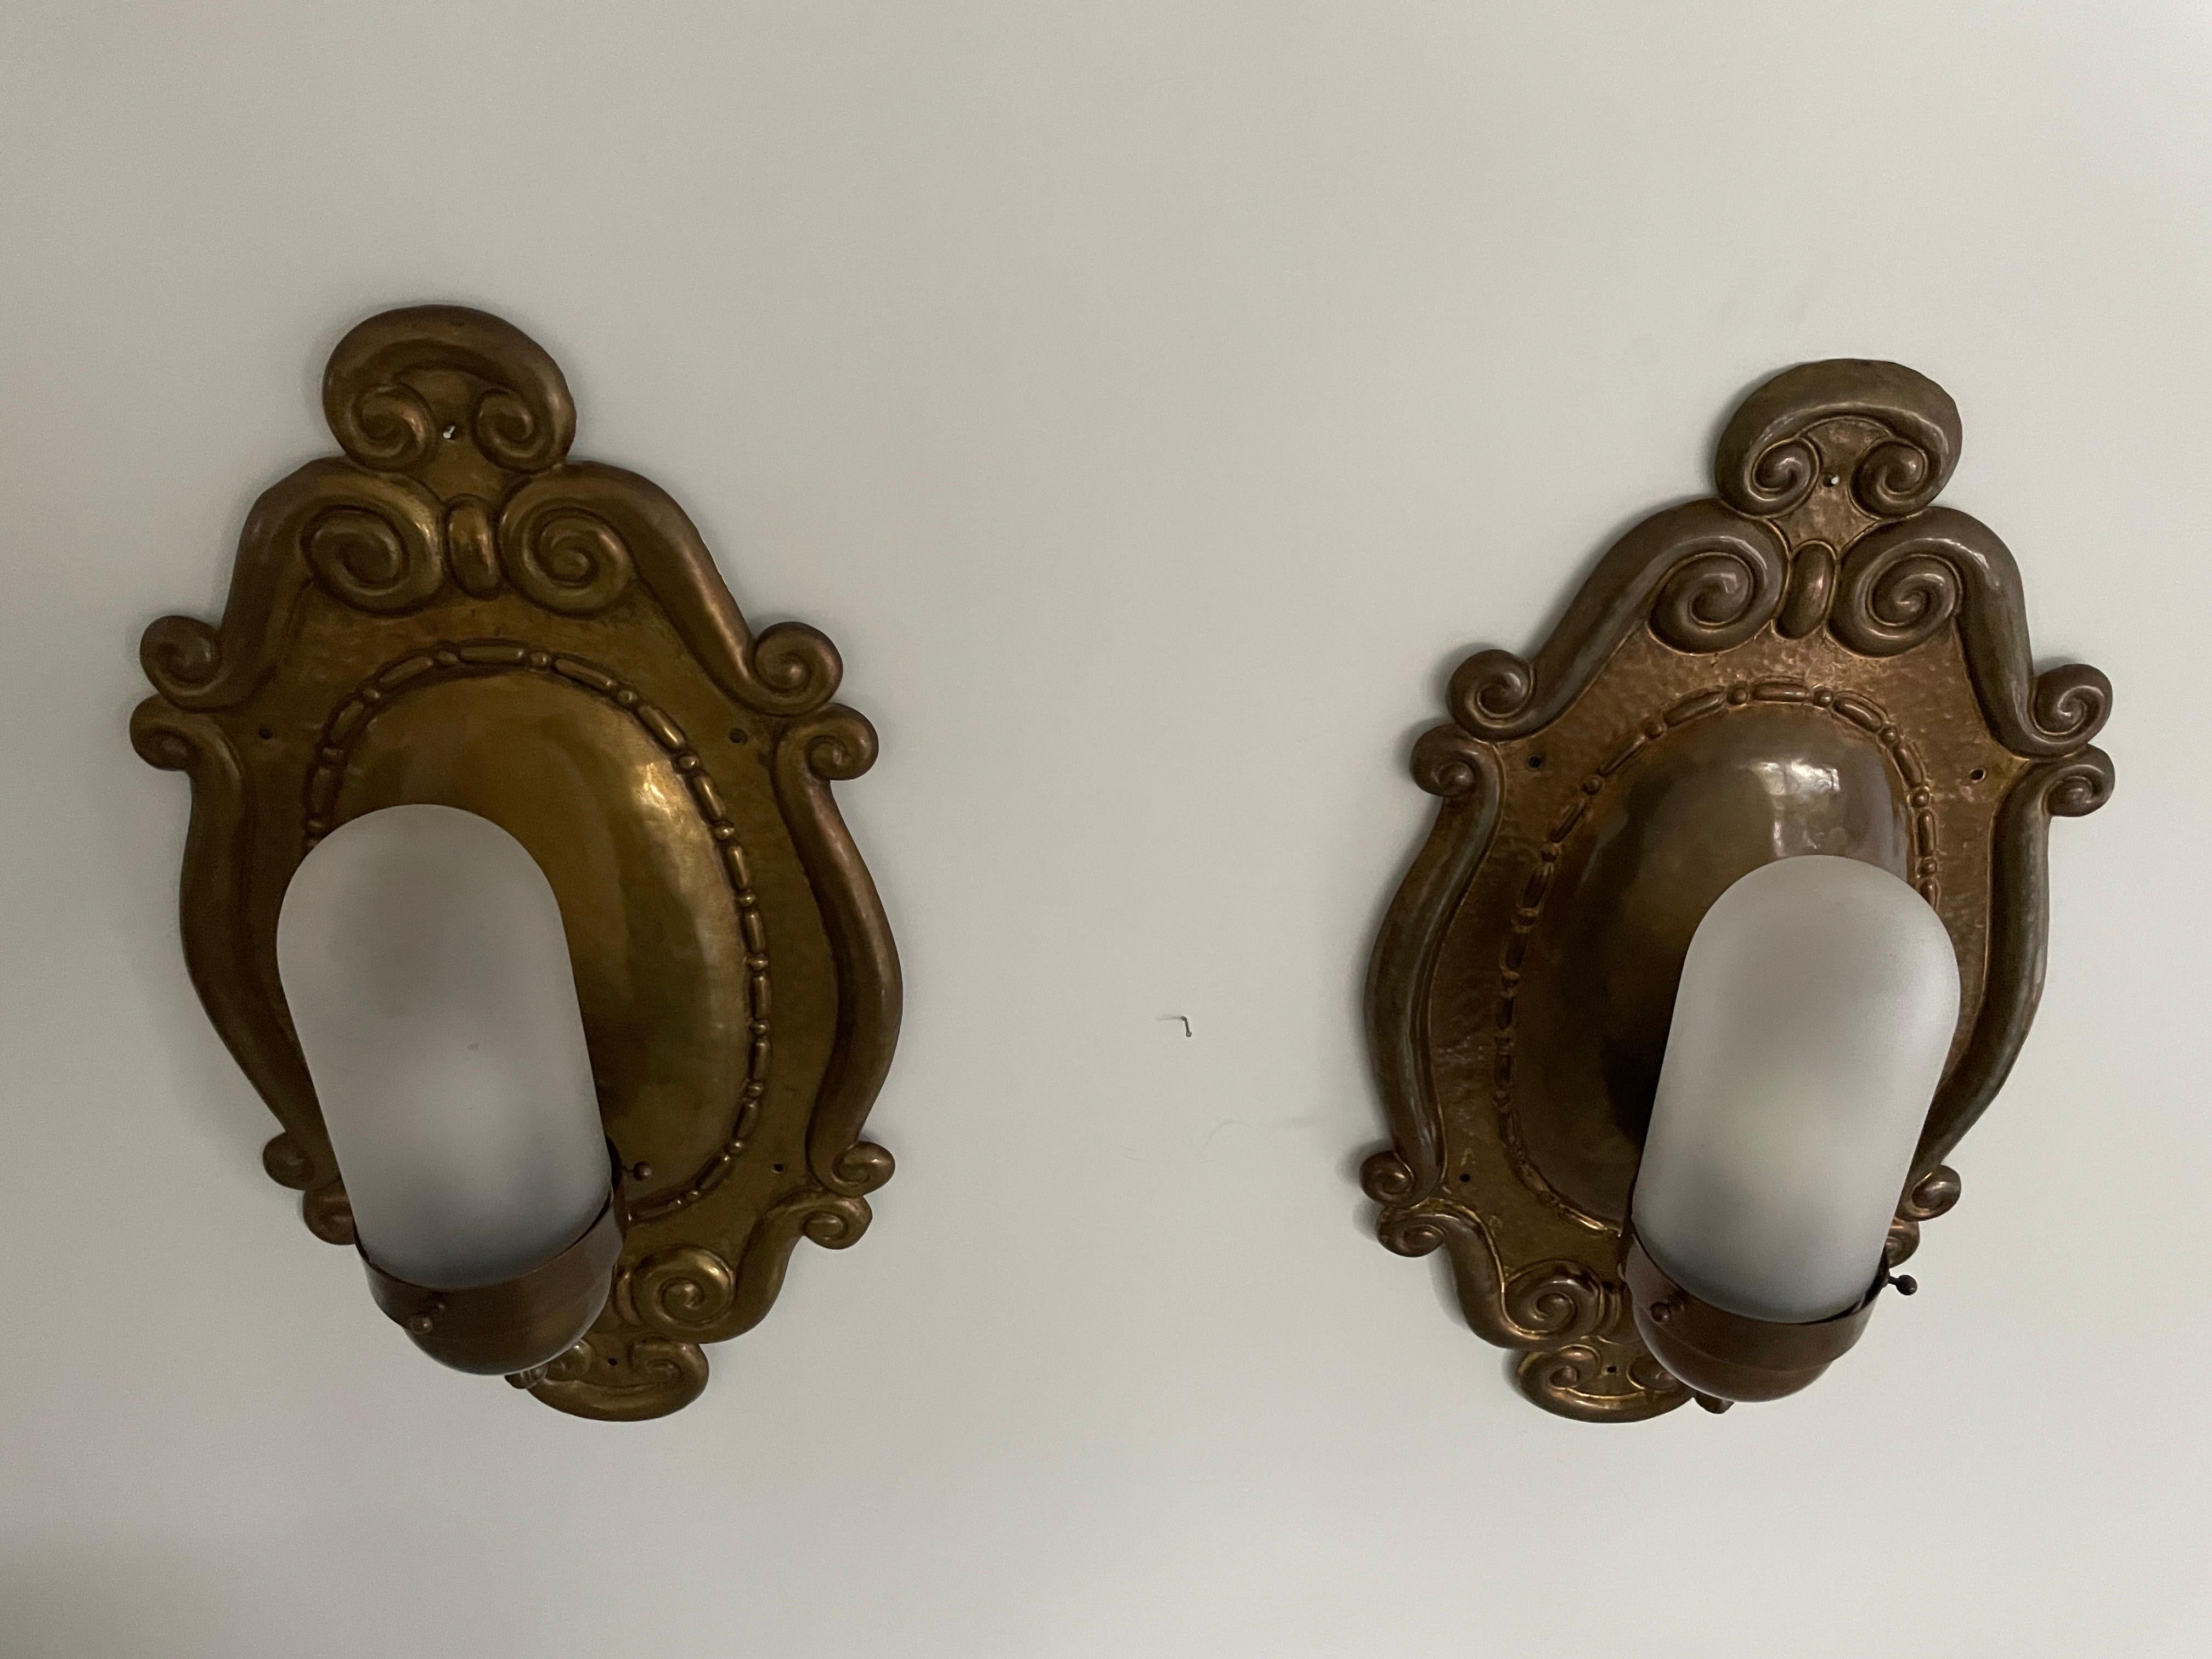 Exceptional Art Deco Glass and Copper Body Pair of Sconces, 1940s, Germany

Lamps are in very good condition.

These lamps works with E27 standard light bulbs. 
Wired and suitable to use in all countries. (110-220 V)

Dimensions:
Height: 58